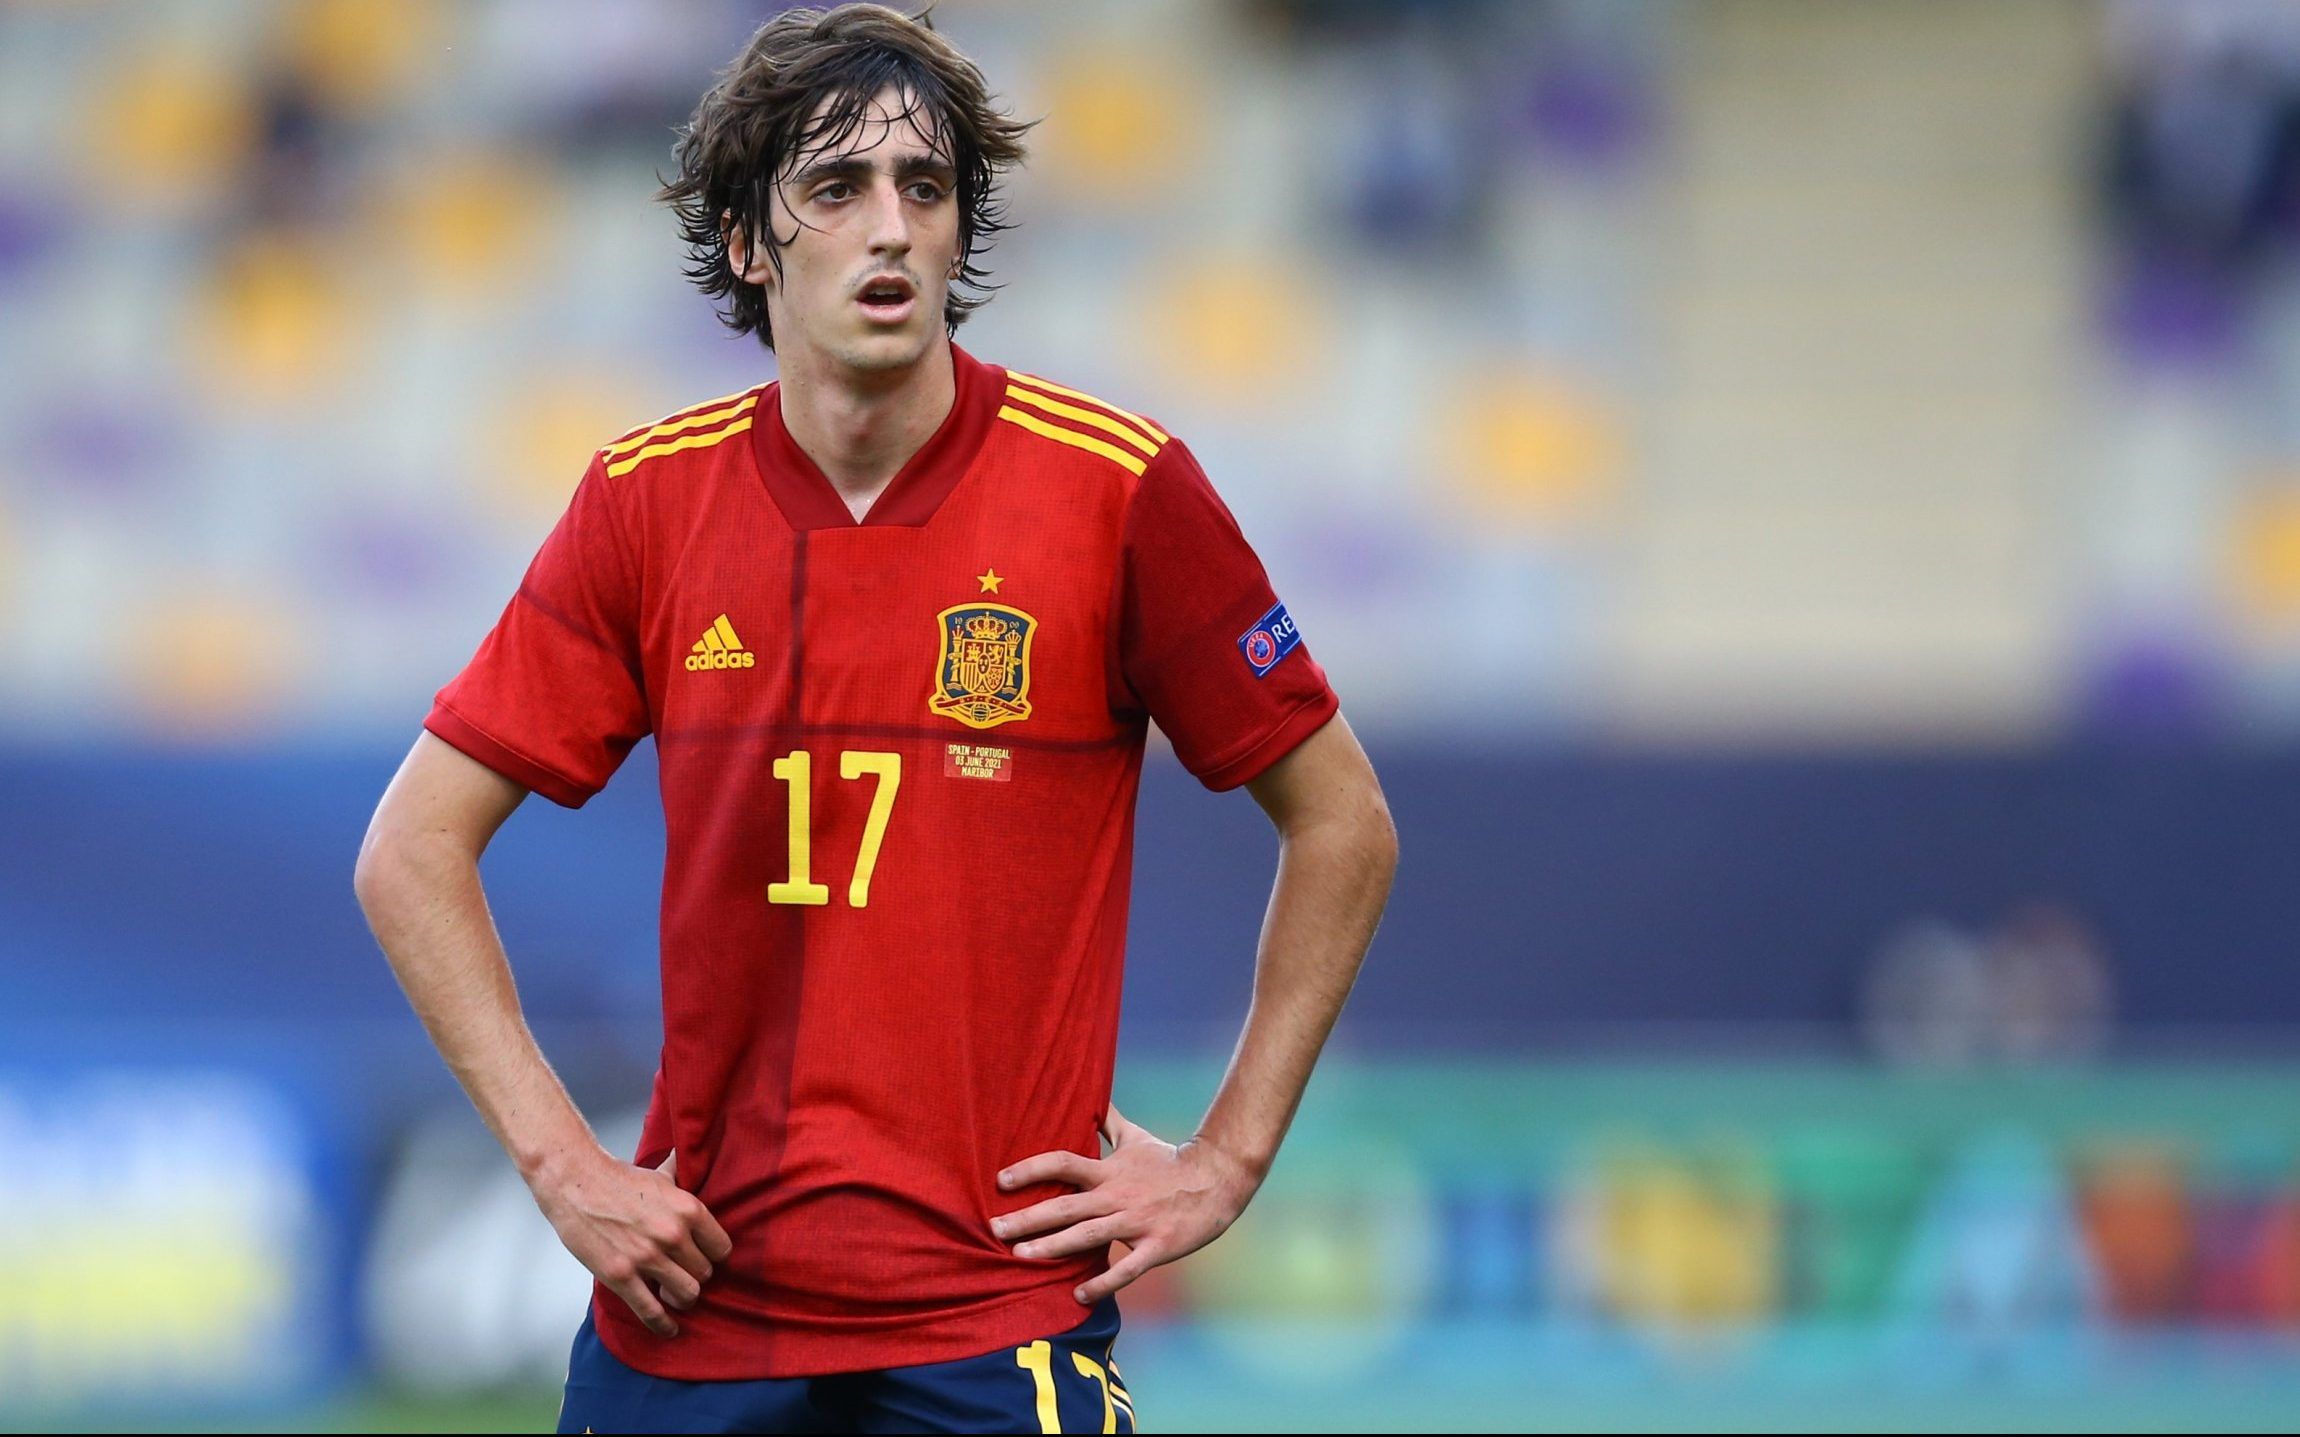 Tottenham Hotspur's Bryan Gil in action for Spain at UEFA Under 21 Championship